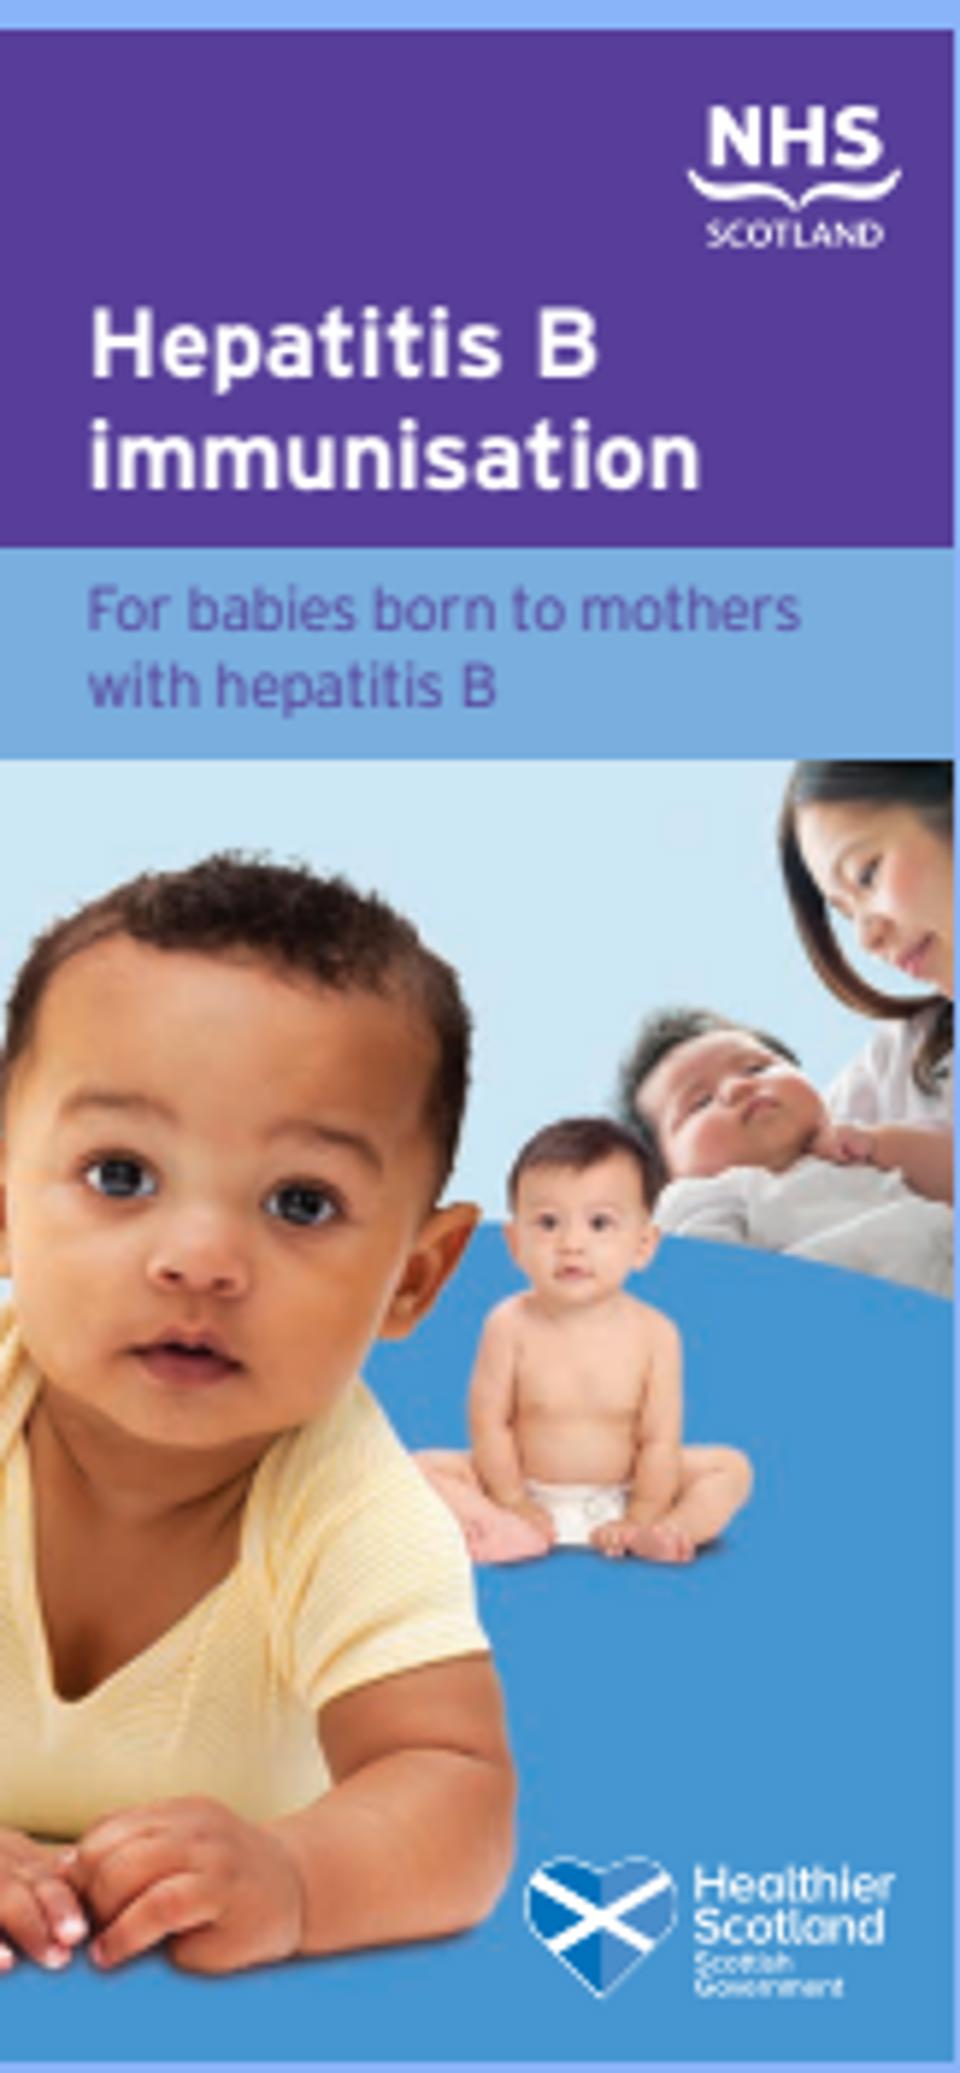 For babies born to mothers with Hepatitis B 